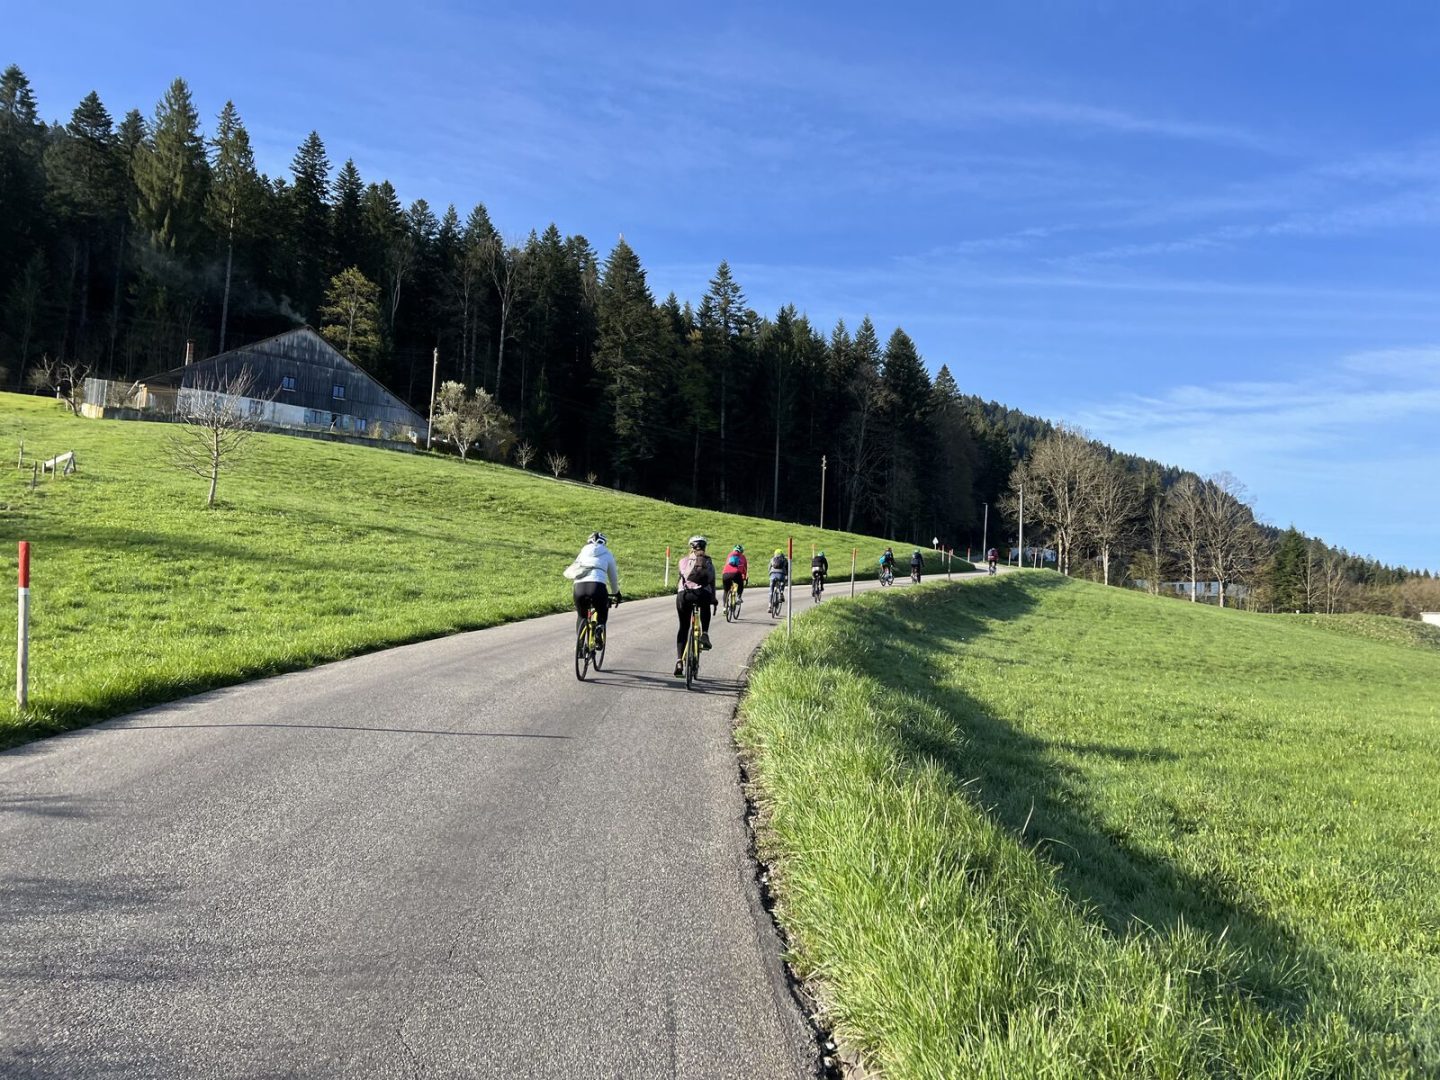 Planning your cycling holiday in Switzerland: cycling holiday tour on a road with trees and forests in the distance 